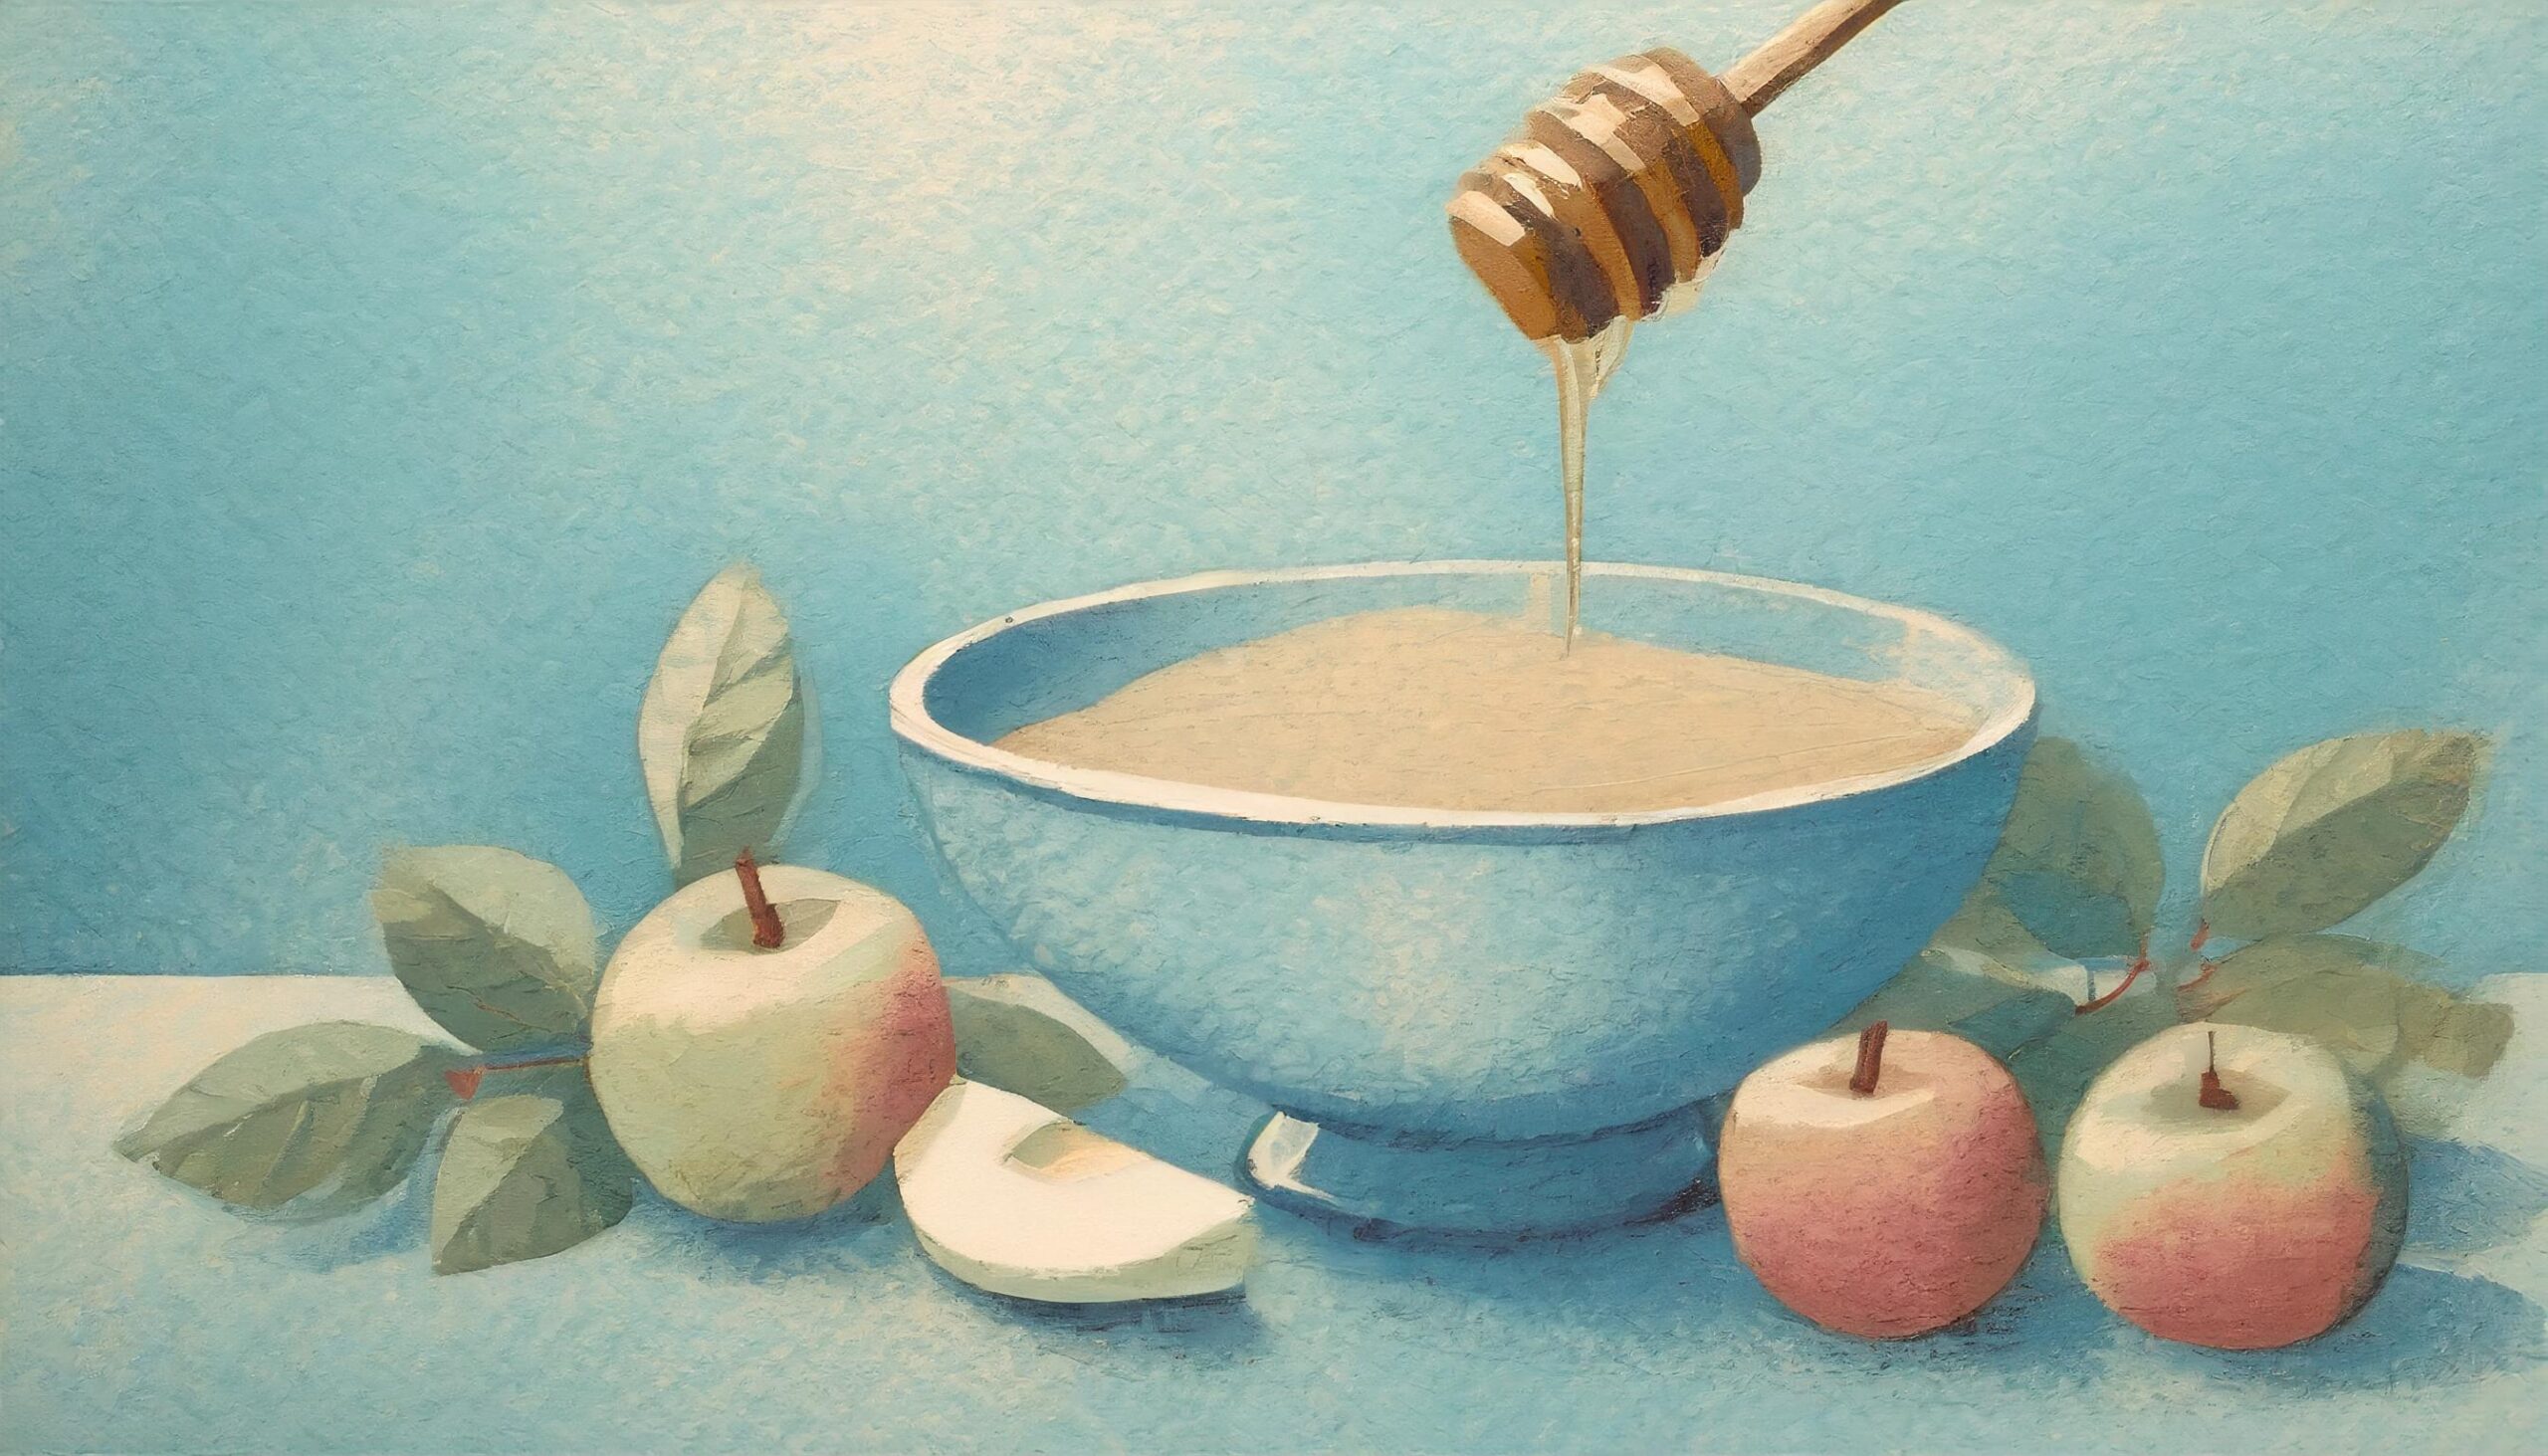 Bowl of honey and apples